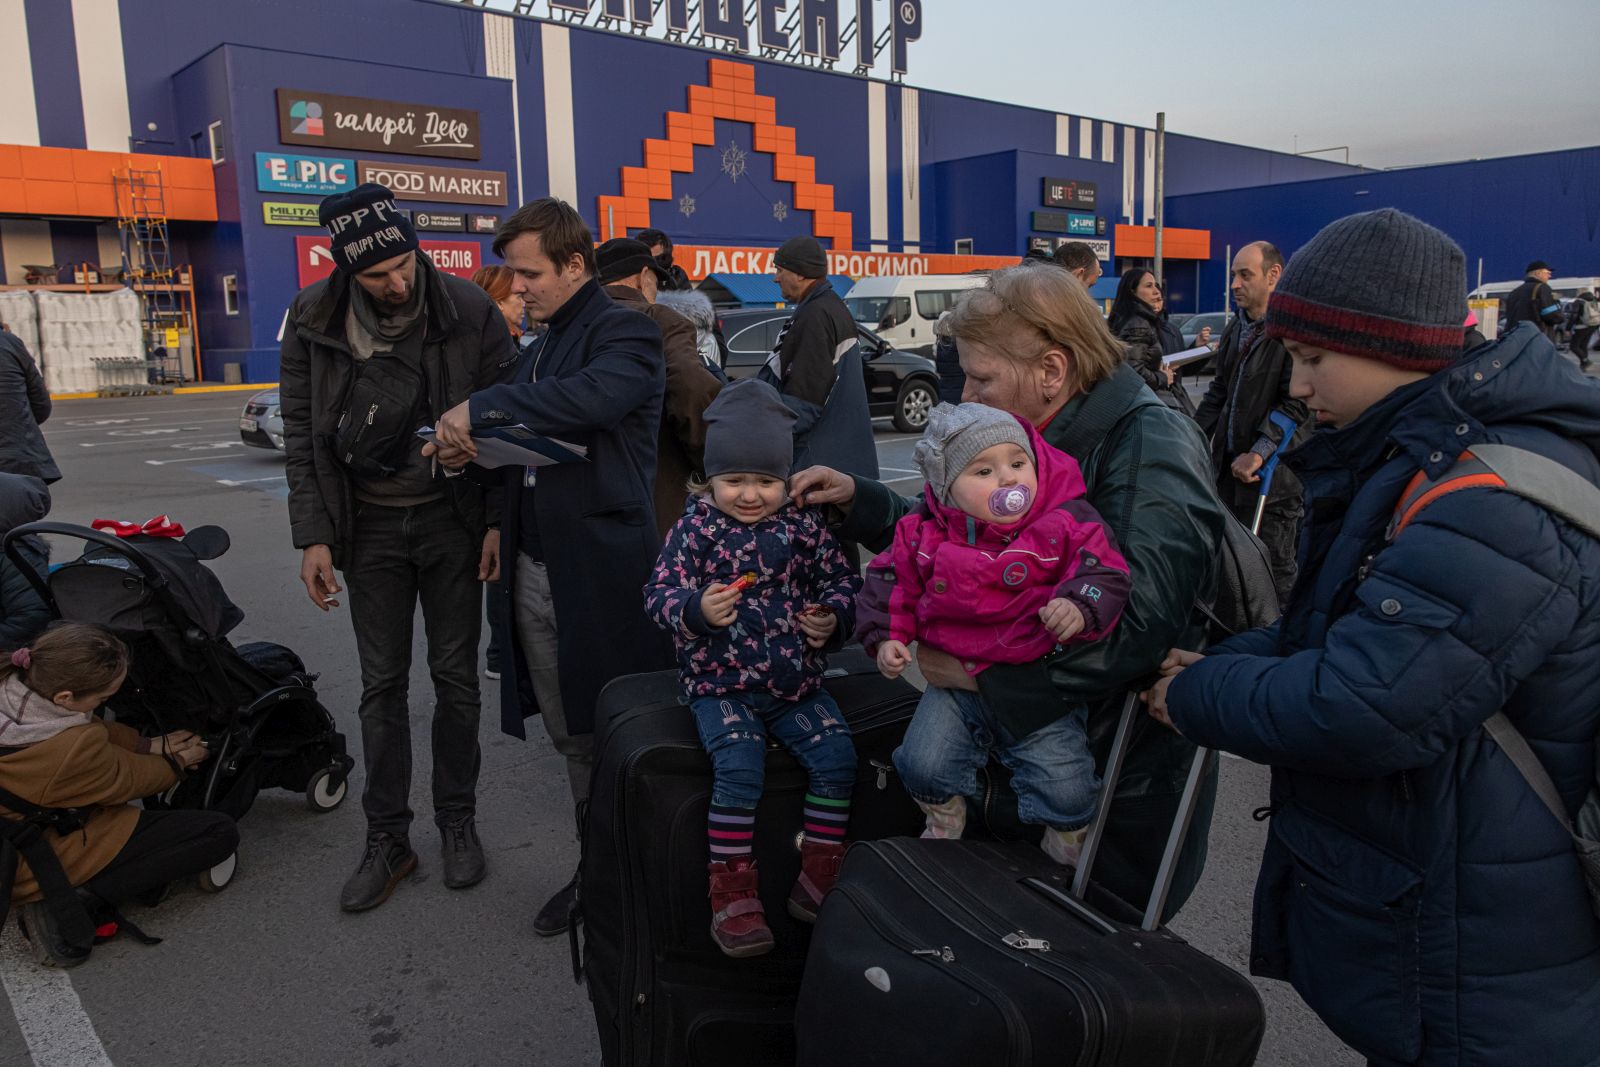 epa09850002 People who fled from the besieged by Russian military southeastern city of Mariupol and occupied Melitopol gather after arriving at the evacuation point in Zaporizhzhia, Ukraine, 25 March 2022. Hundreds of people were evacuated on 25 March from the southeastern cities of Mariupol and Melitopol and arrived in Ukraine's controlled area by buses and their own cars. Almost 100,000 residents remain trapped and live in 'inhuman conditions' without food and water in the ruined city of Mariupol, amid Russia's 'constant shelling', Ukrainian president Volodymyr Zelenskyy says.  EPA/ROMAN PILIPEY